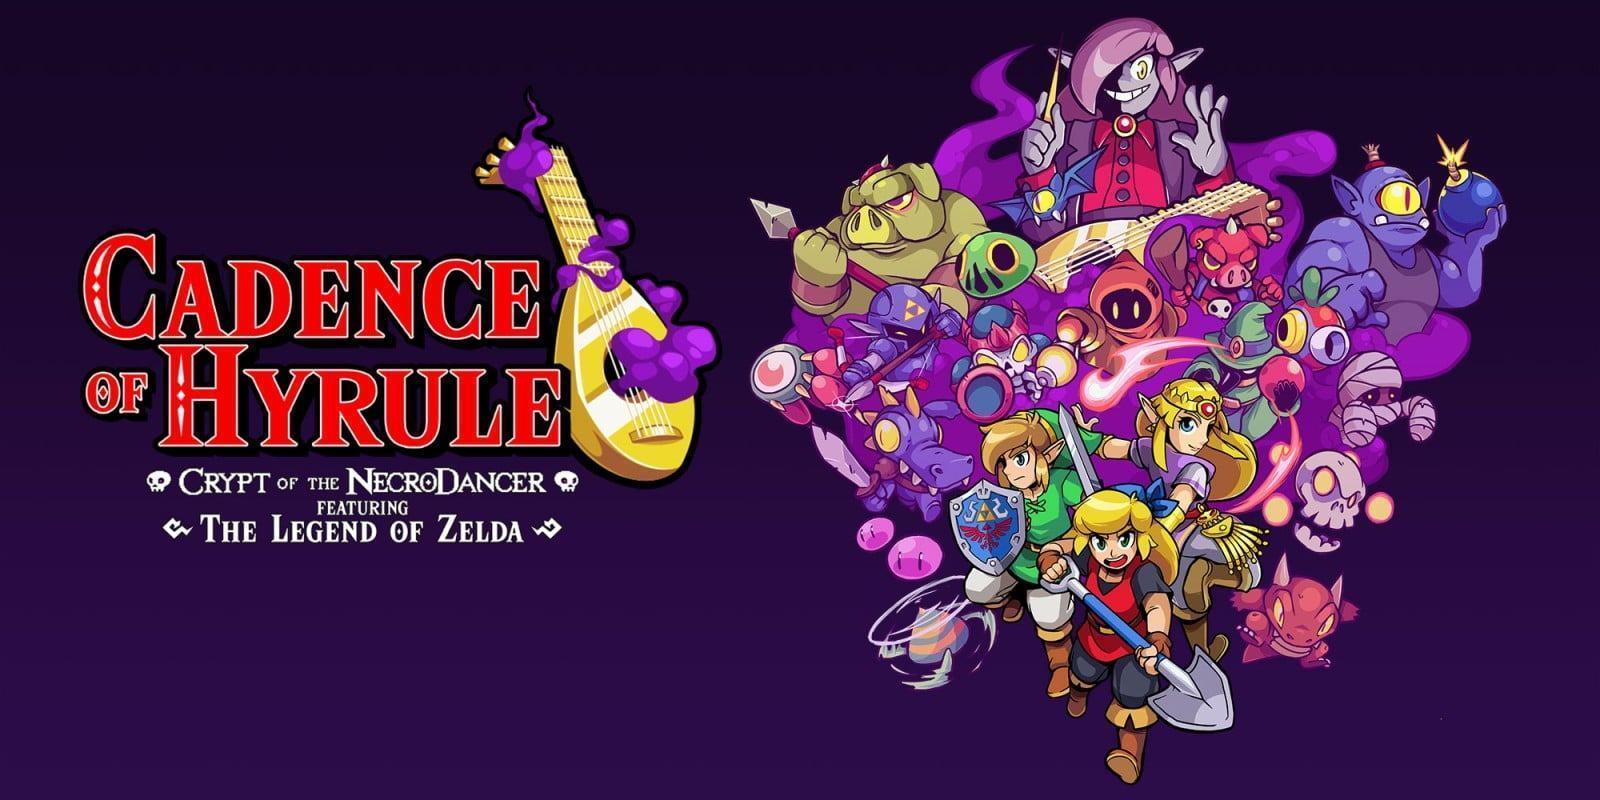 Disponibile il DLC Octavo's Ode per Cadence of Hyrule 8